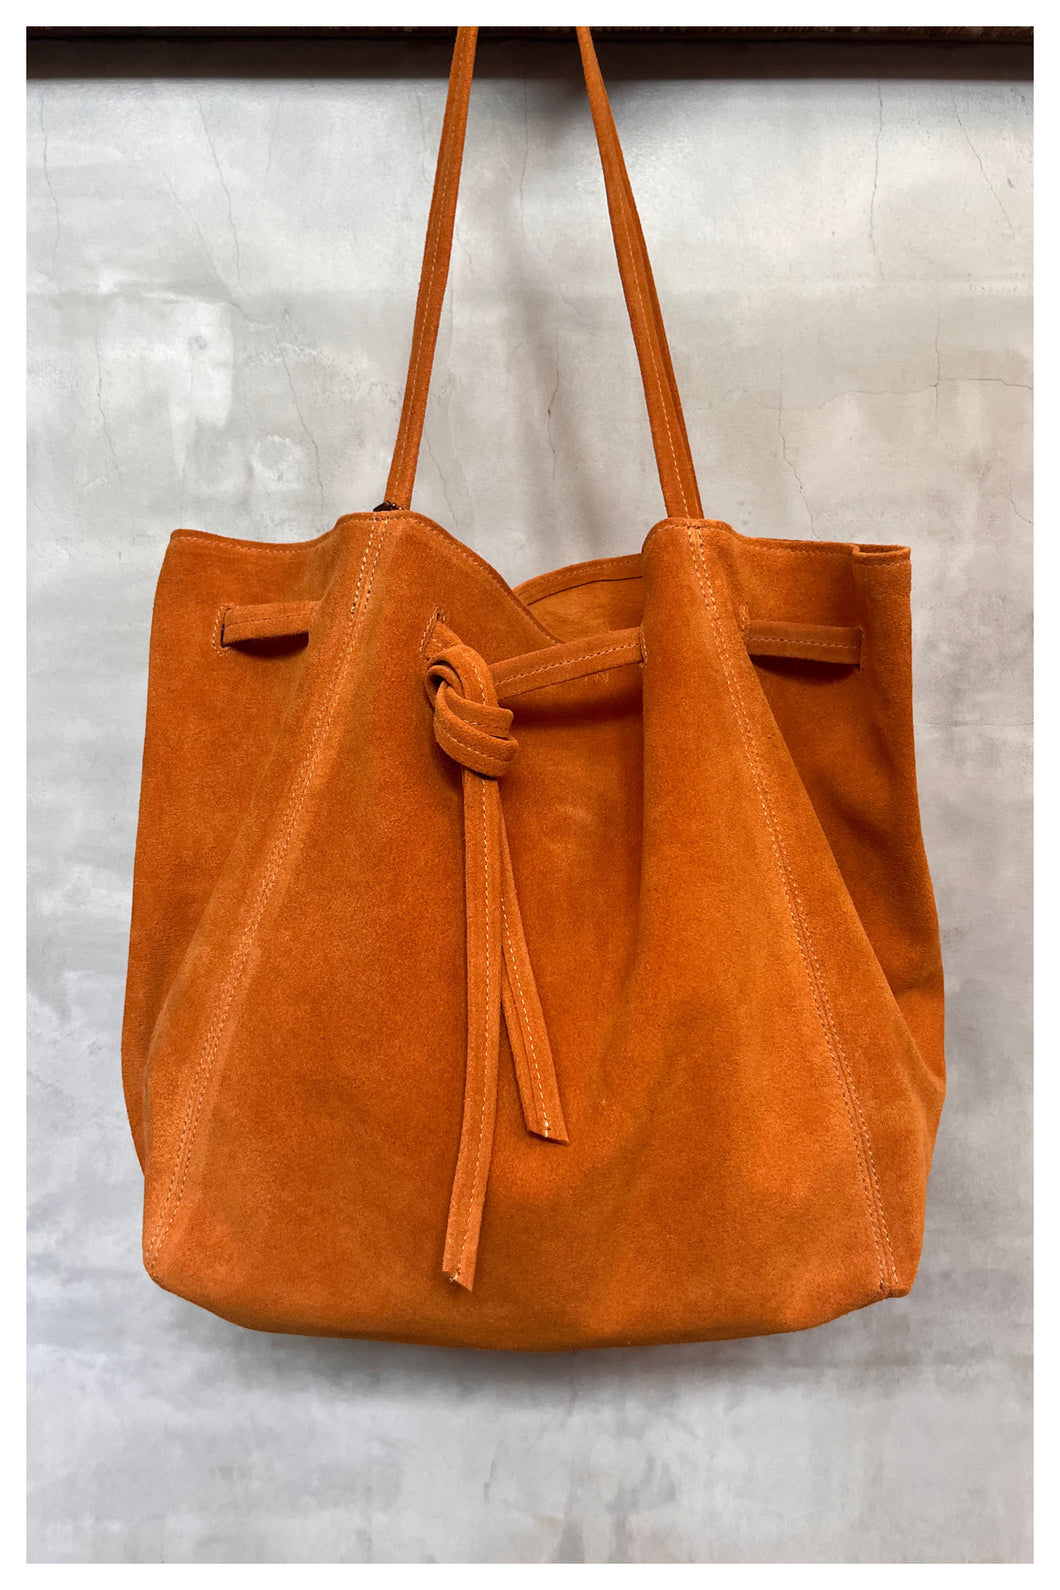 The Florence tote